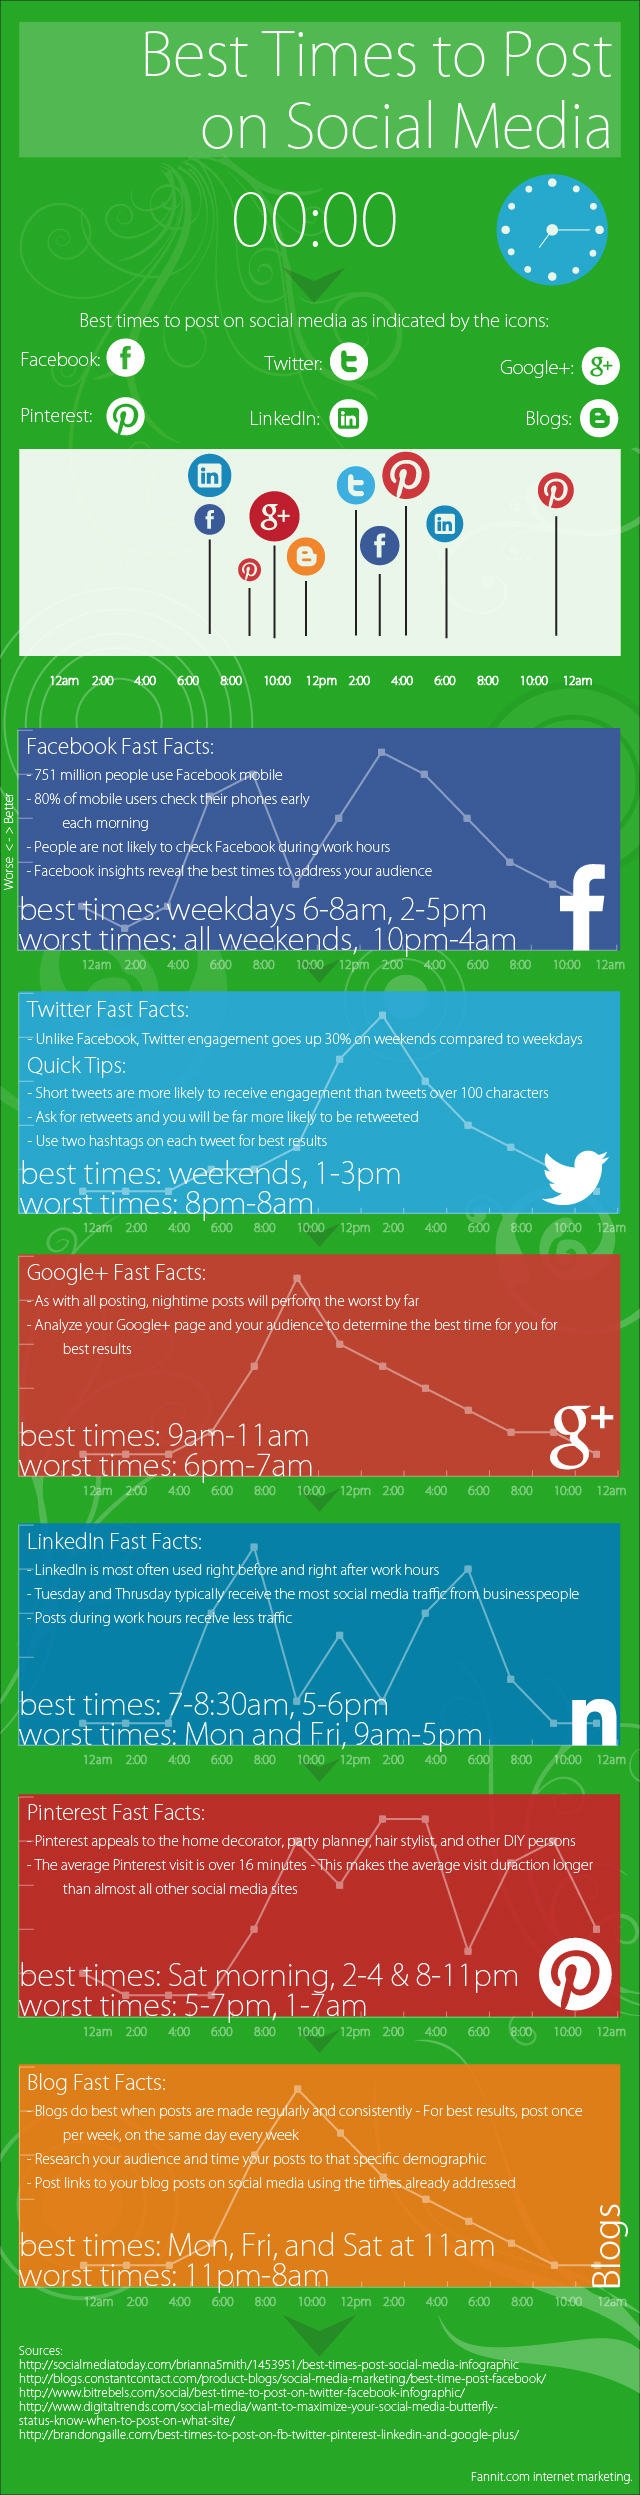 Best Times To Post On Social Media$